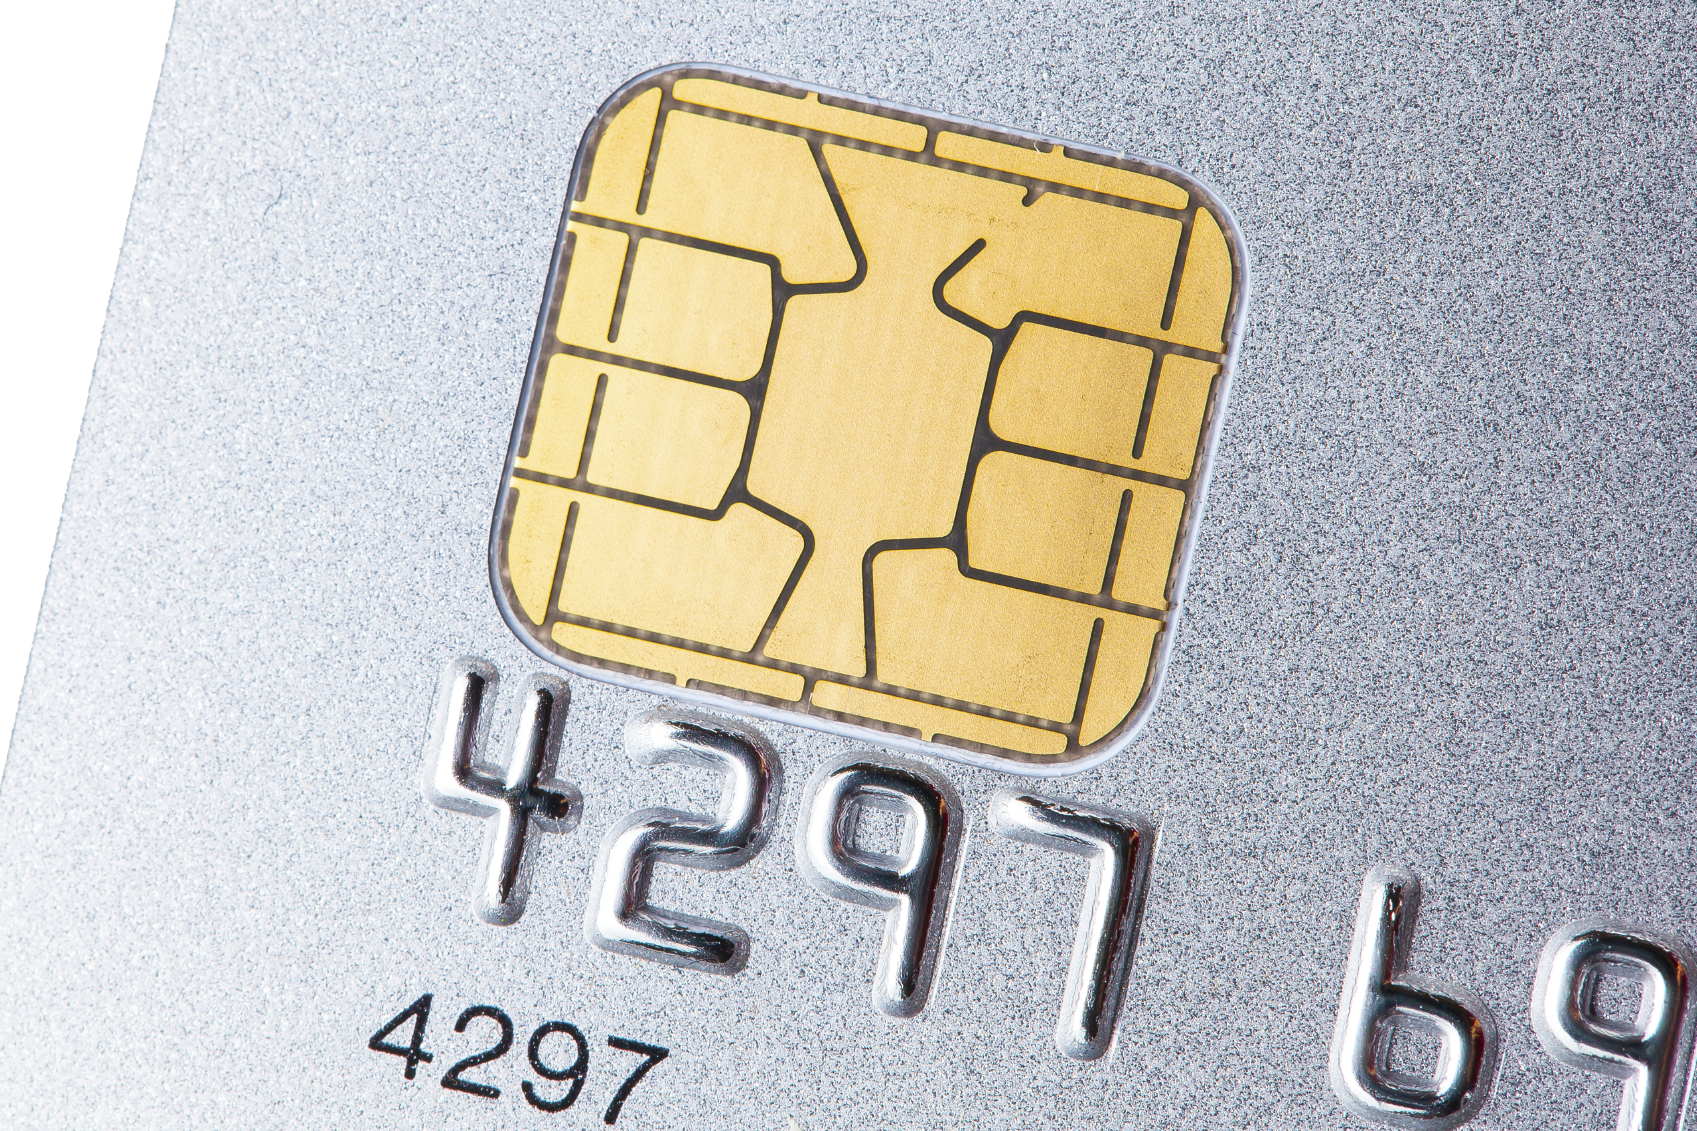 5 things know about new chip-enabled credit cards - CBS News